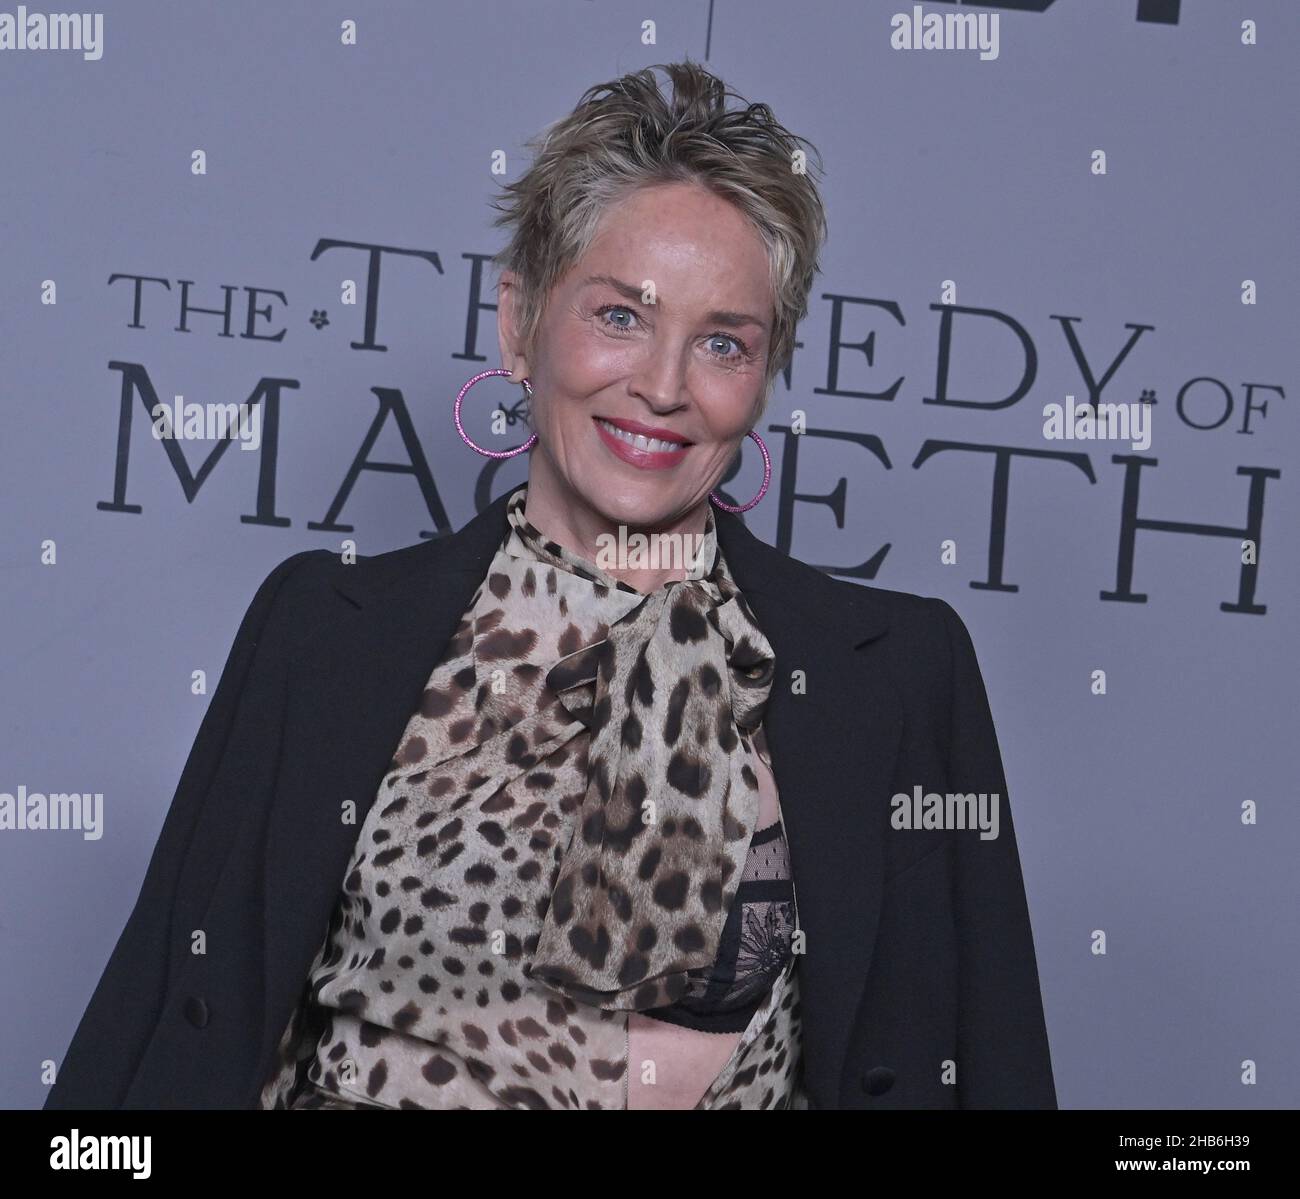 Los Angeles, USA. 17th Dec, 2021. Actress Sharon Stone attends the premiere of the motion picture historical war thriller 'The Tragedy of Macbeth' at the DGA Theatre in Los Angeles on Thursday, December 16, 2021. Storyline: A Scottish lord becomes convinced by a trio of witches that he will become the next King of Scotland, and his ambitious wife supports him in his plans of seizing power. Photo by Jim Ruymen/UPI Credit: UPI/Alamy Live News Stock Photo